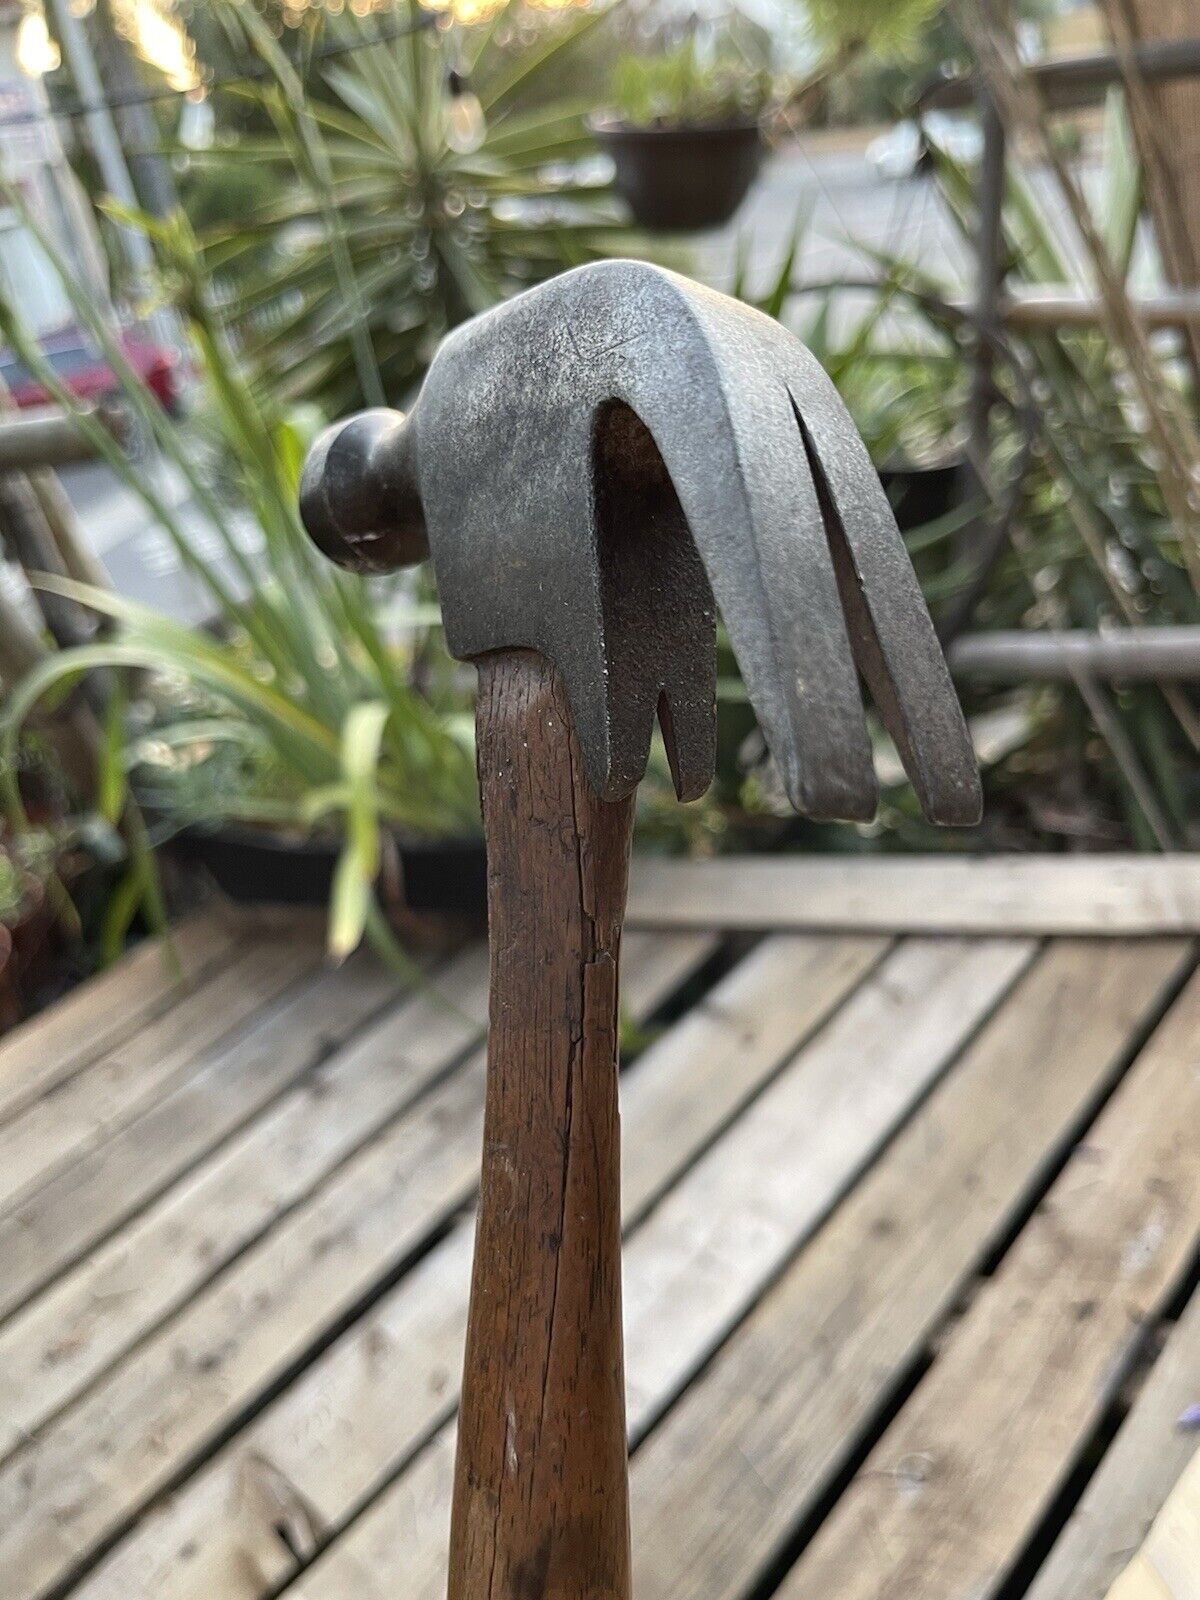 Antique Vintage Double Claw Hammer-UNICAST-Duo-Claw, Gorgeous HAMMER VERY RARE